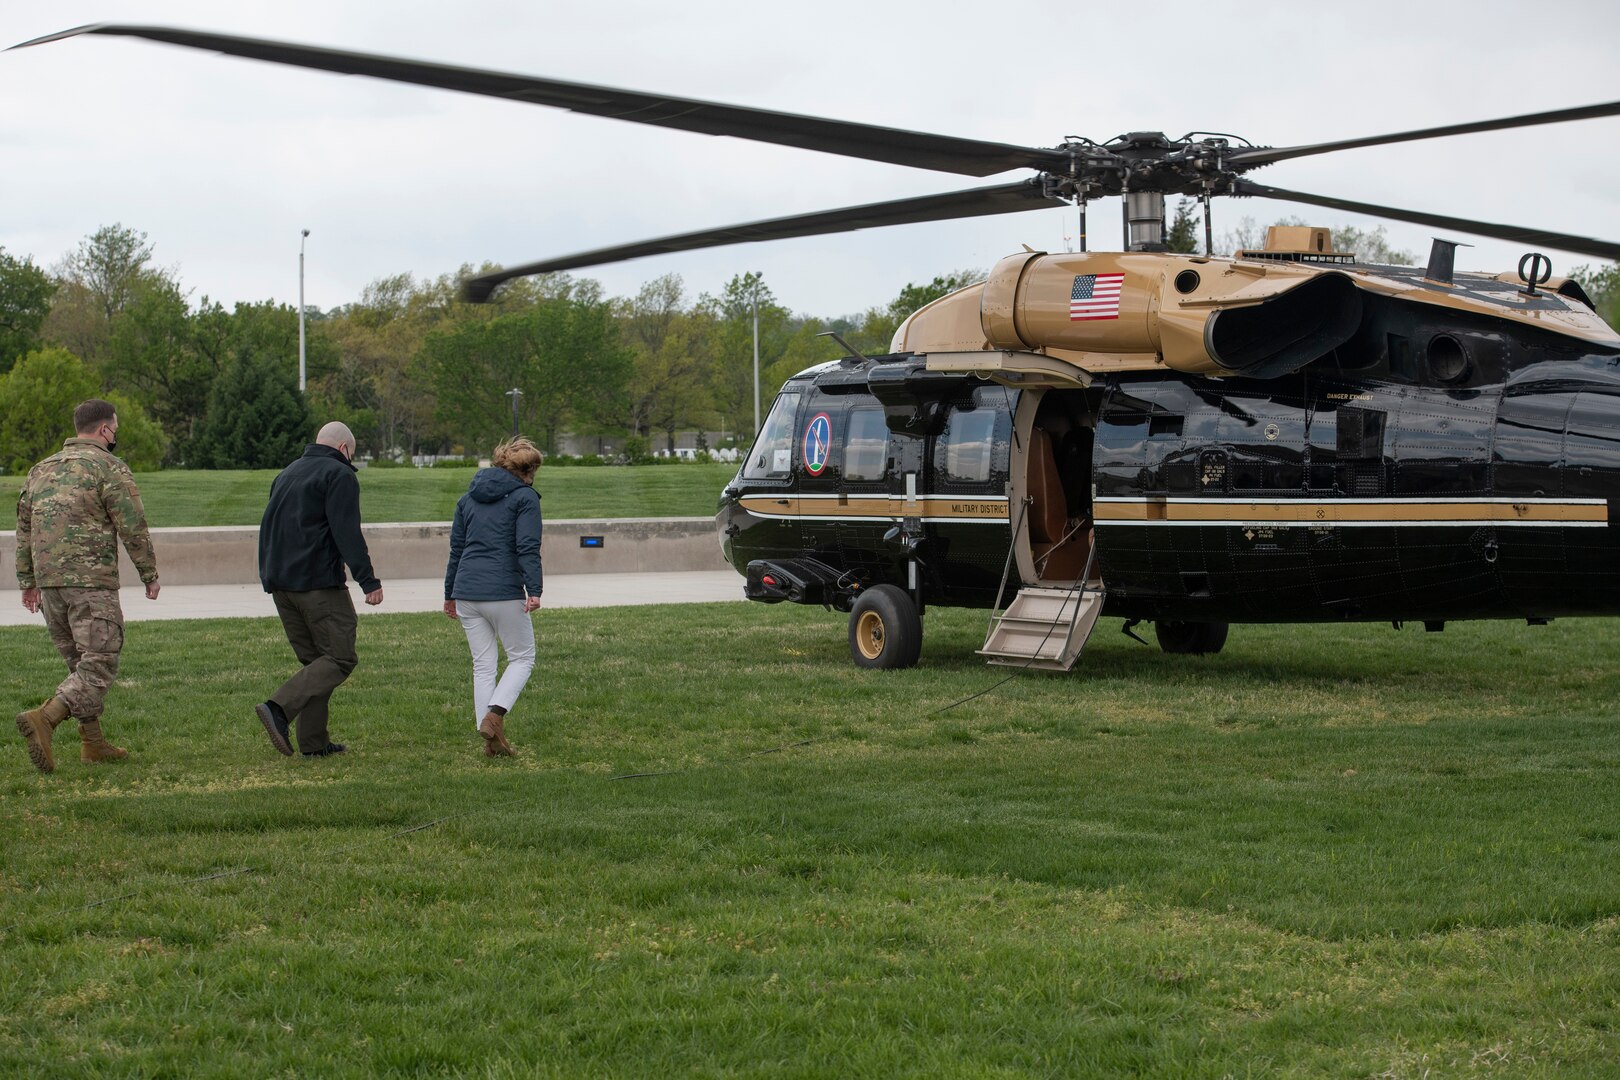 A woman walks toward a helicopter followed by two men.